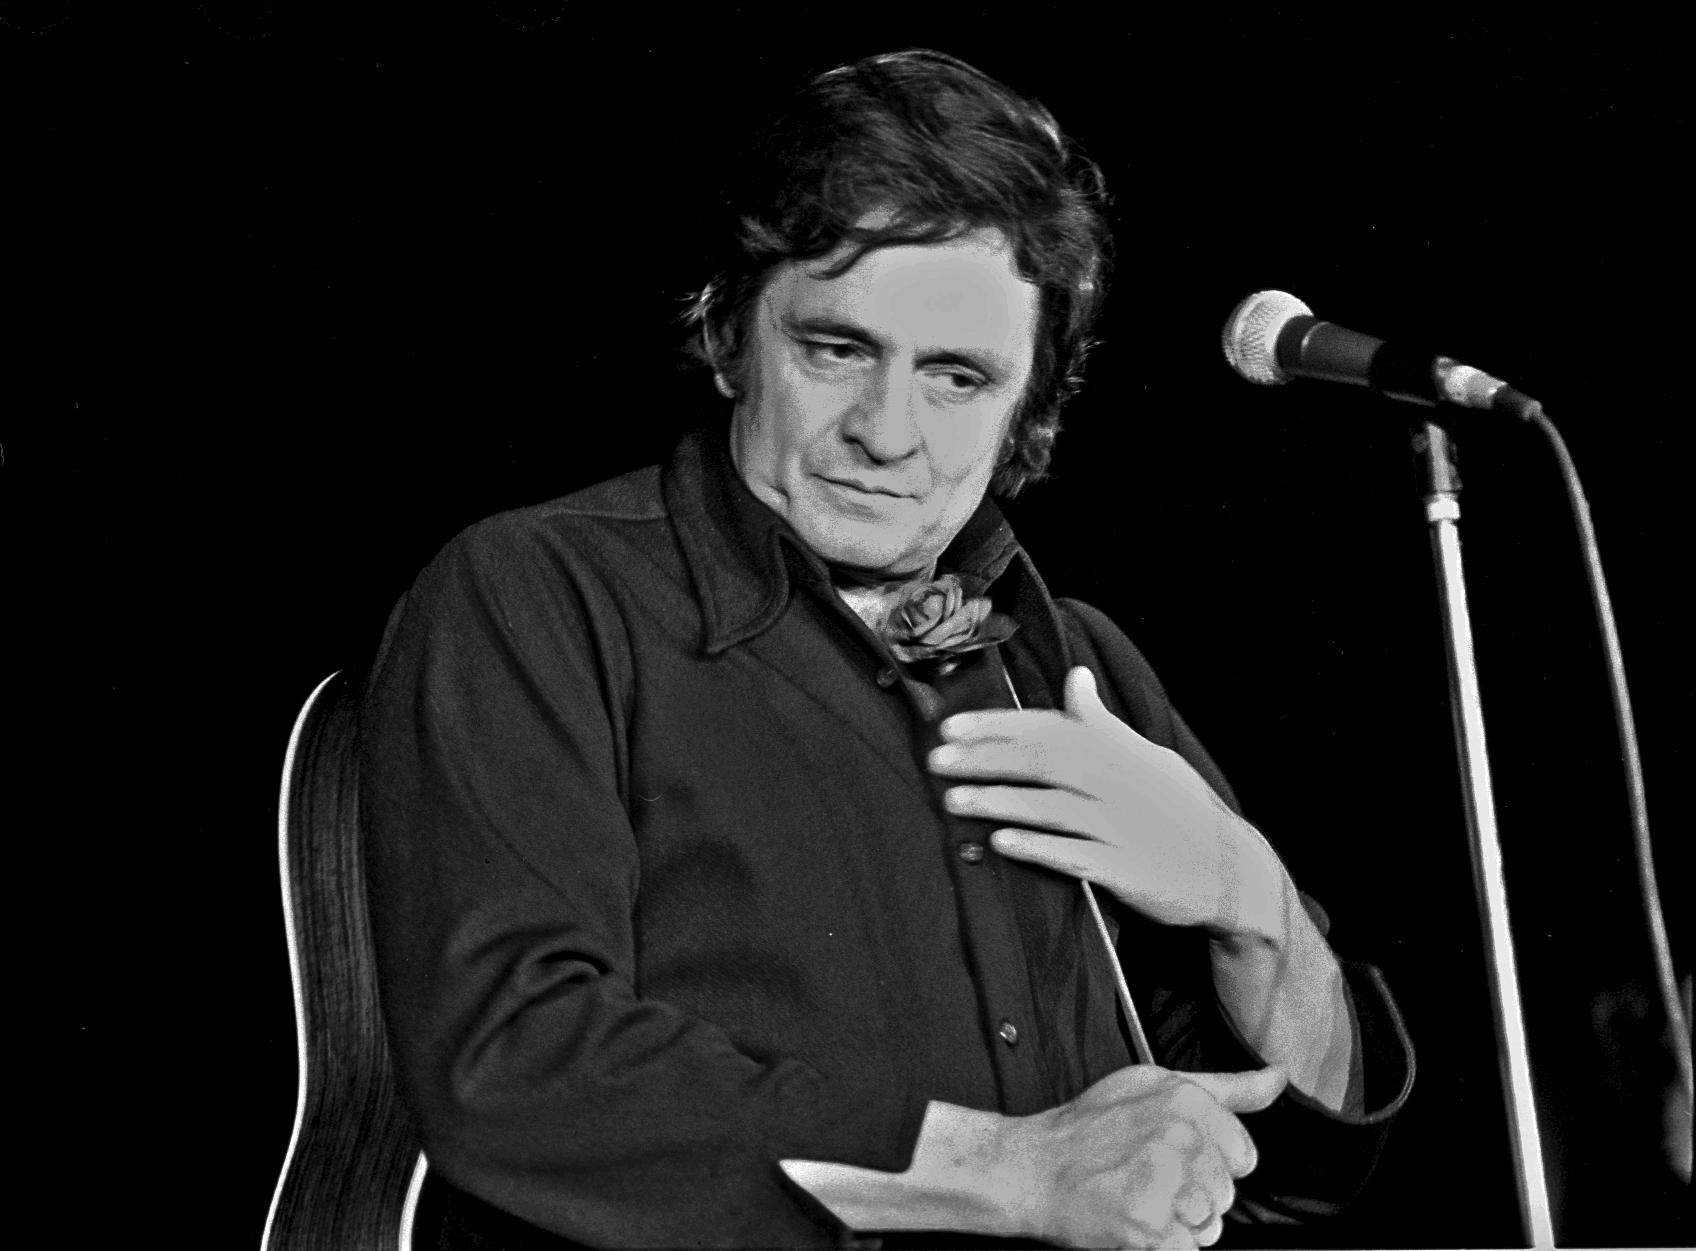  Photo taken by Heinrich Klaffs of an individual with the name of Johnny Cash